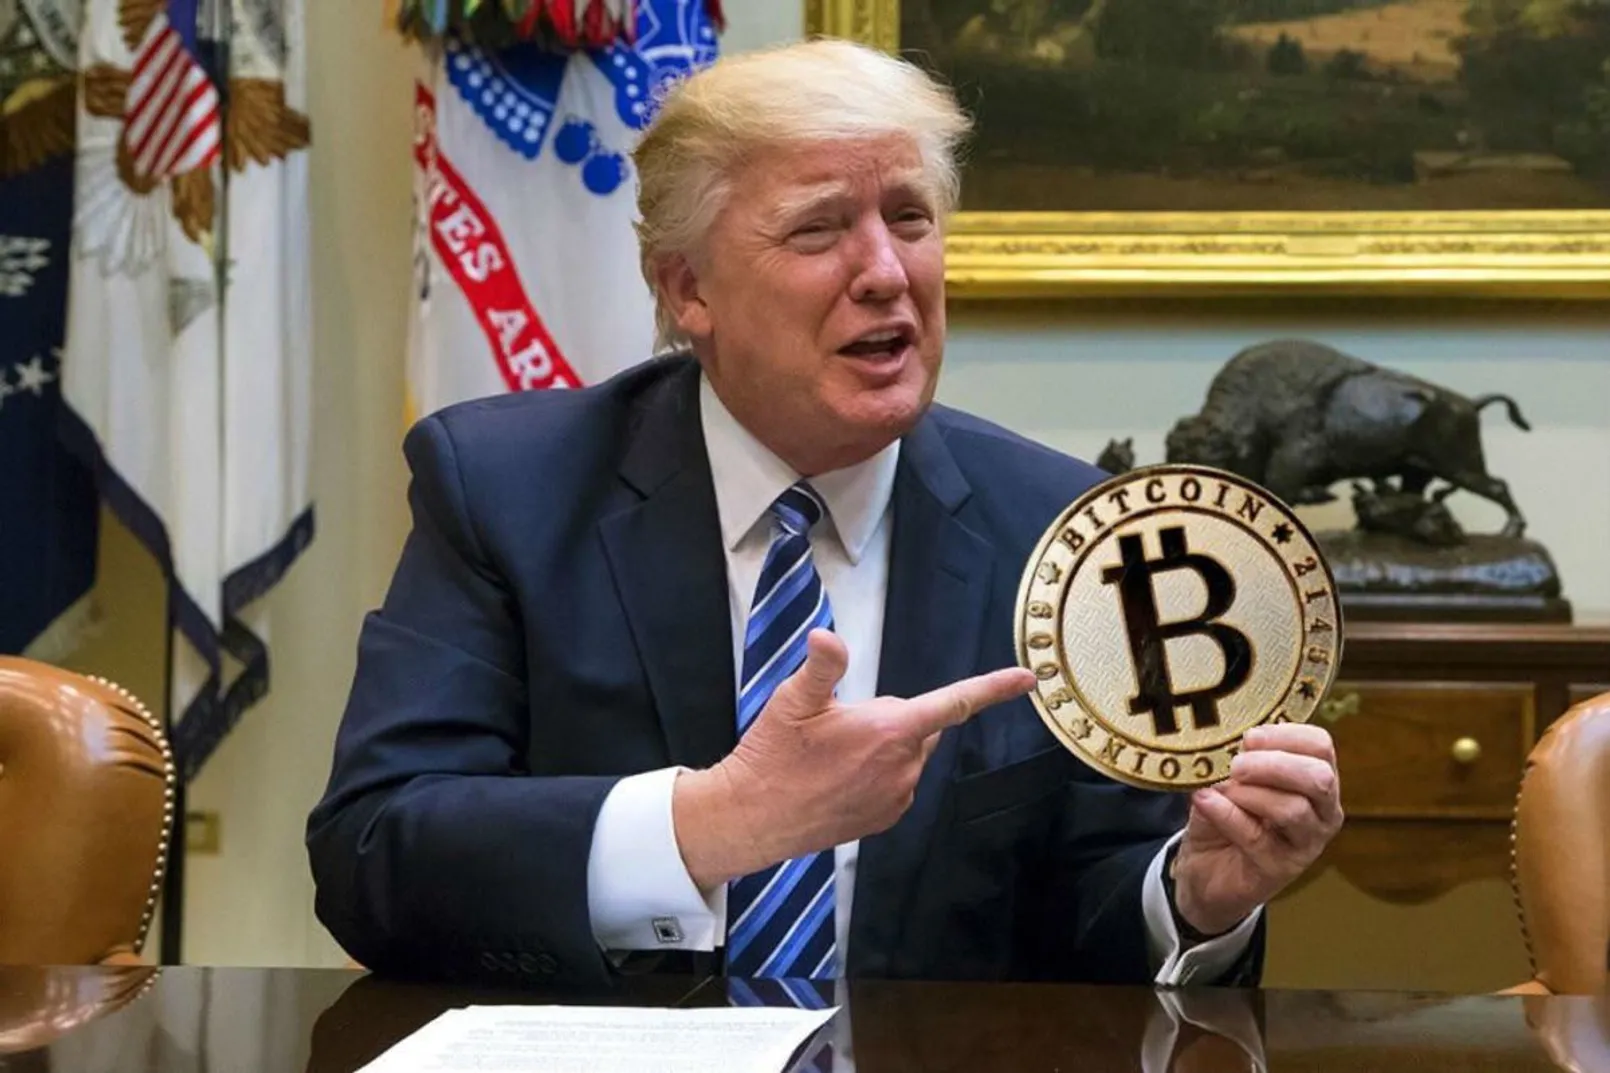 Annoying Bitcoin Statement From Donald Trump V Wh Vw Q8 N.jpeg